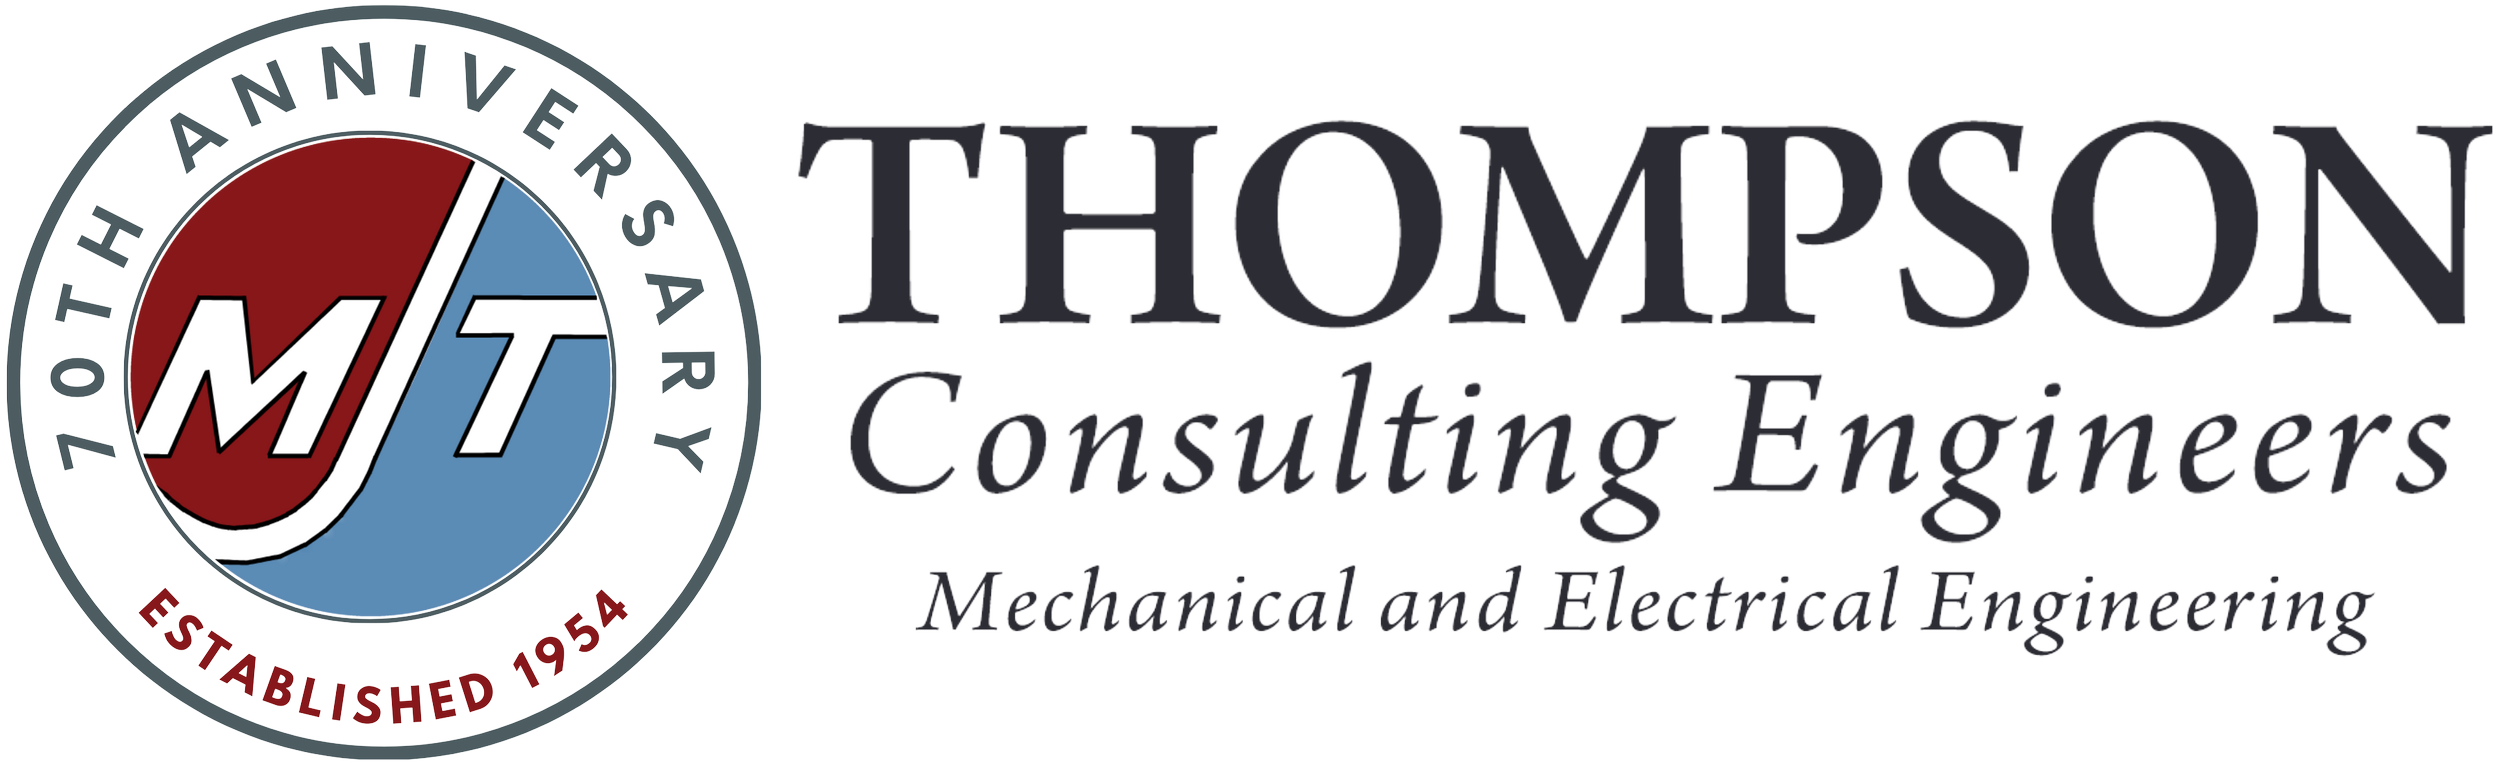 Thompson Consulting Engineers | High Performance Design Engineers